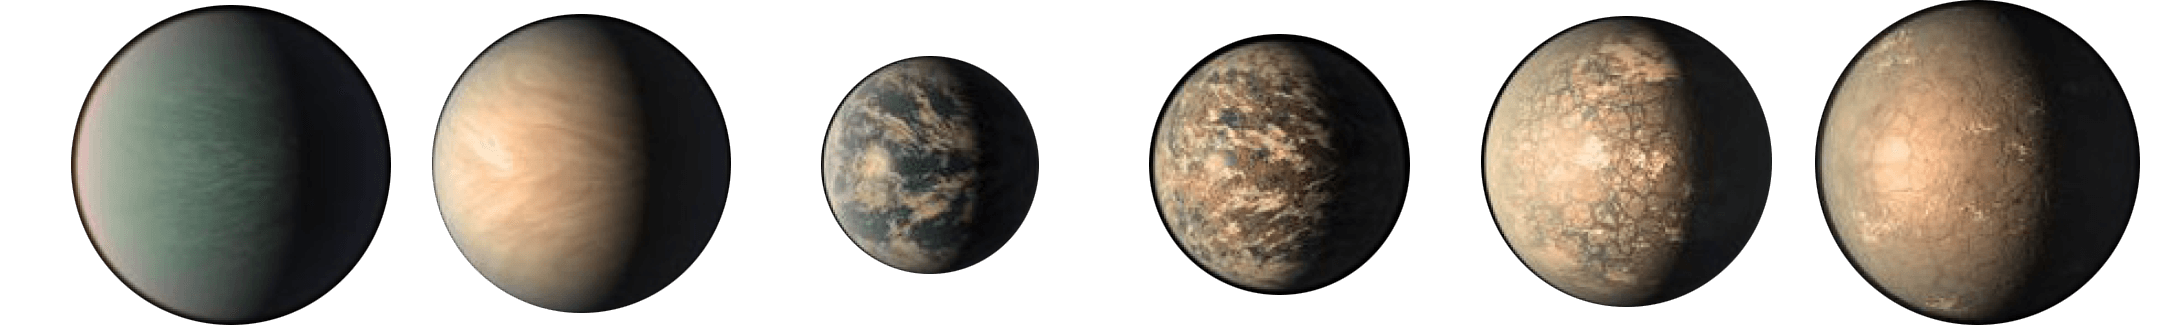 images of planets